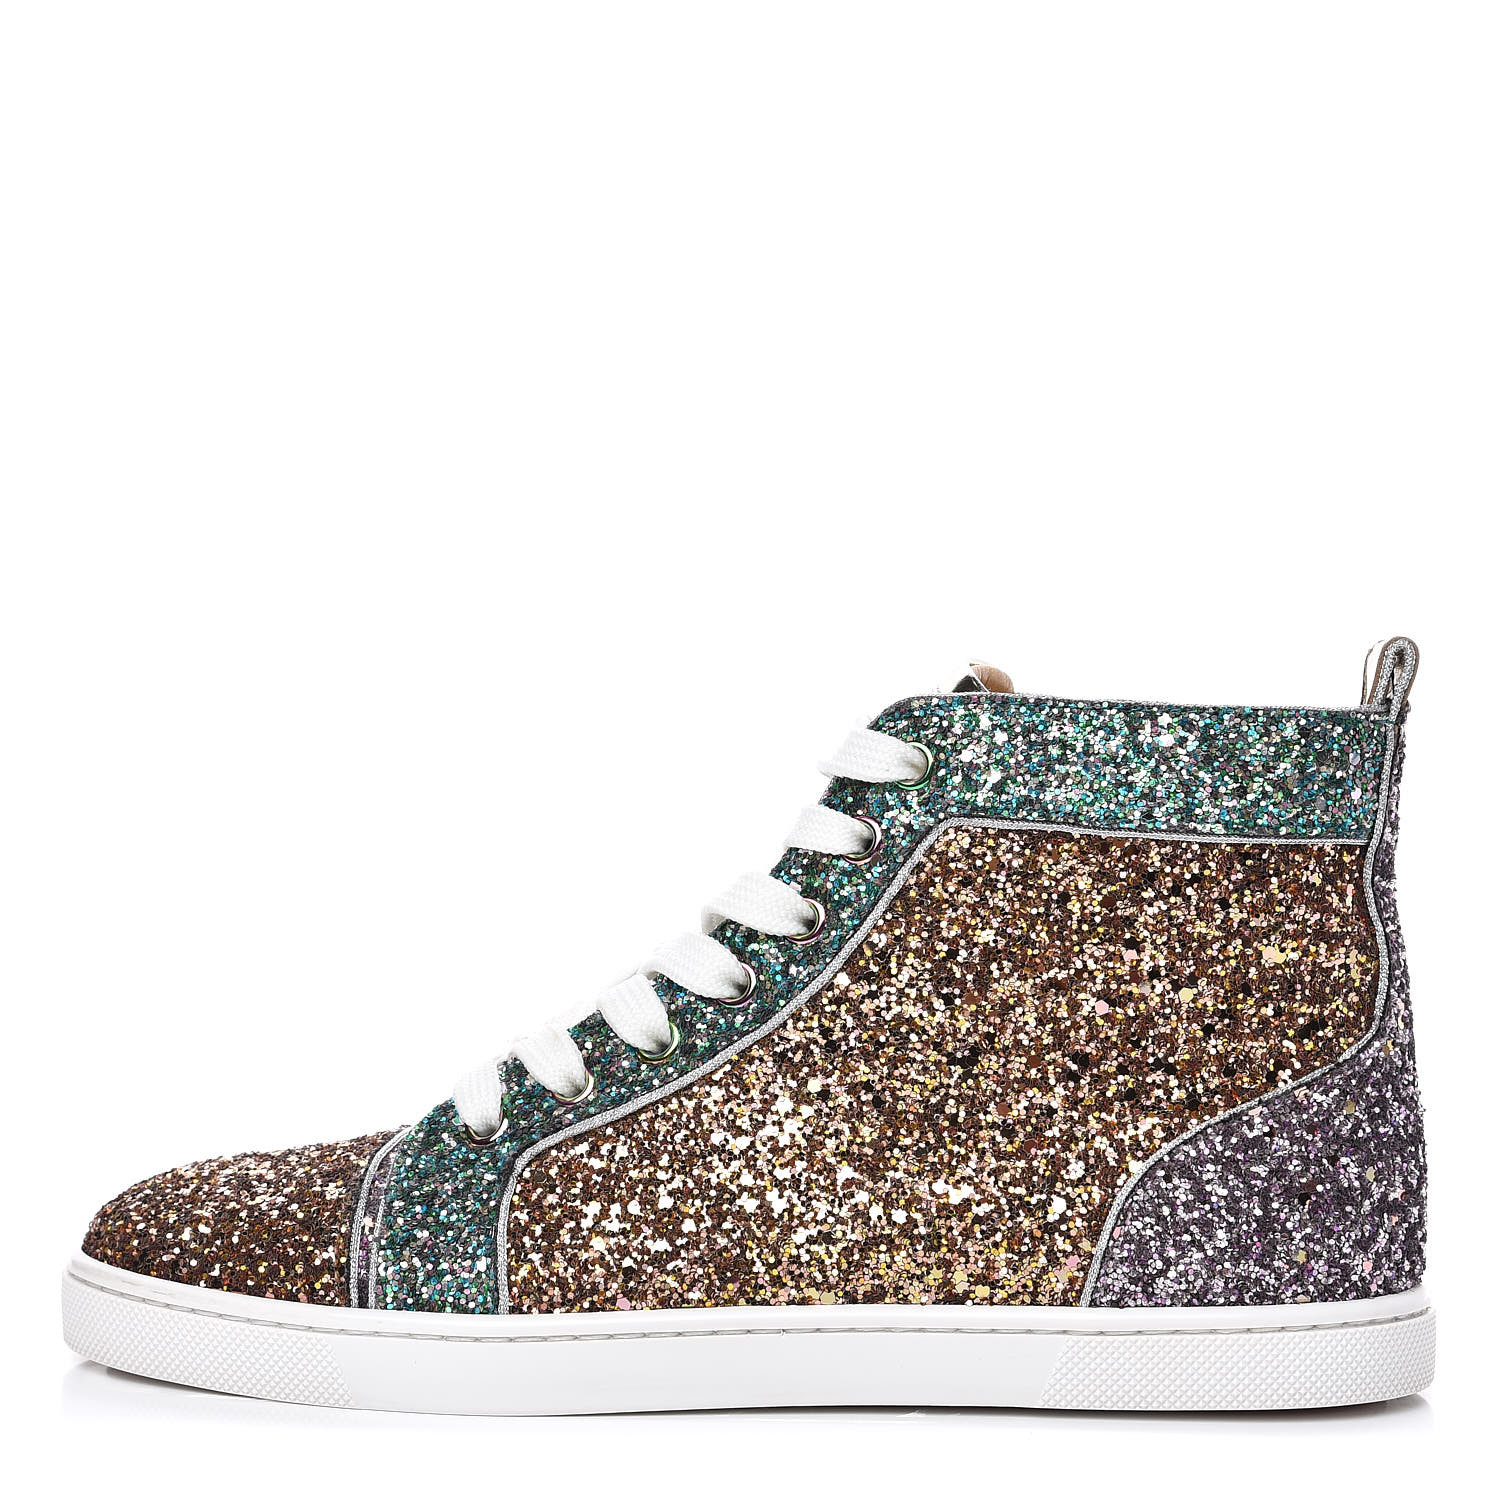 sparkly christian louboutin sneakers